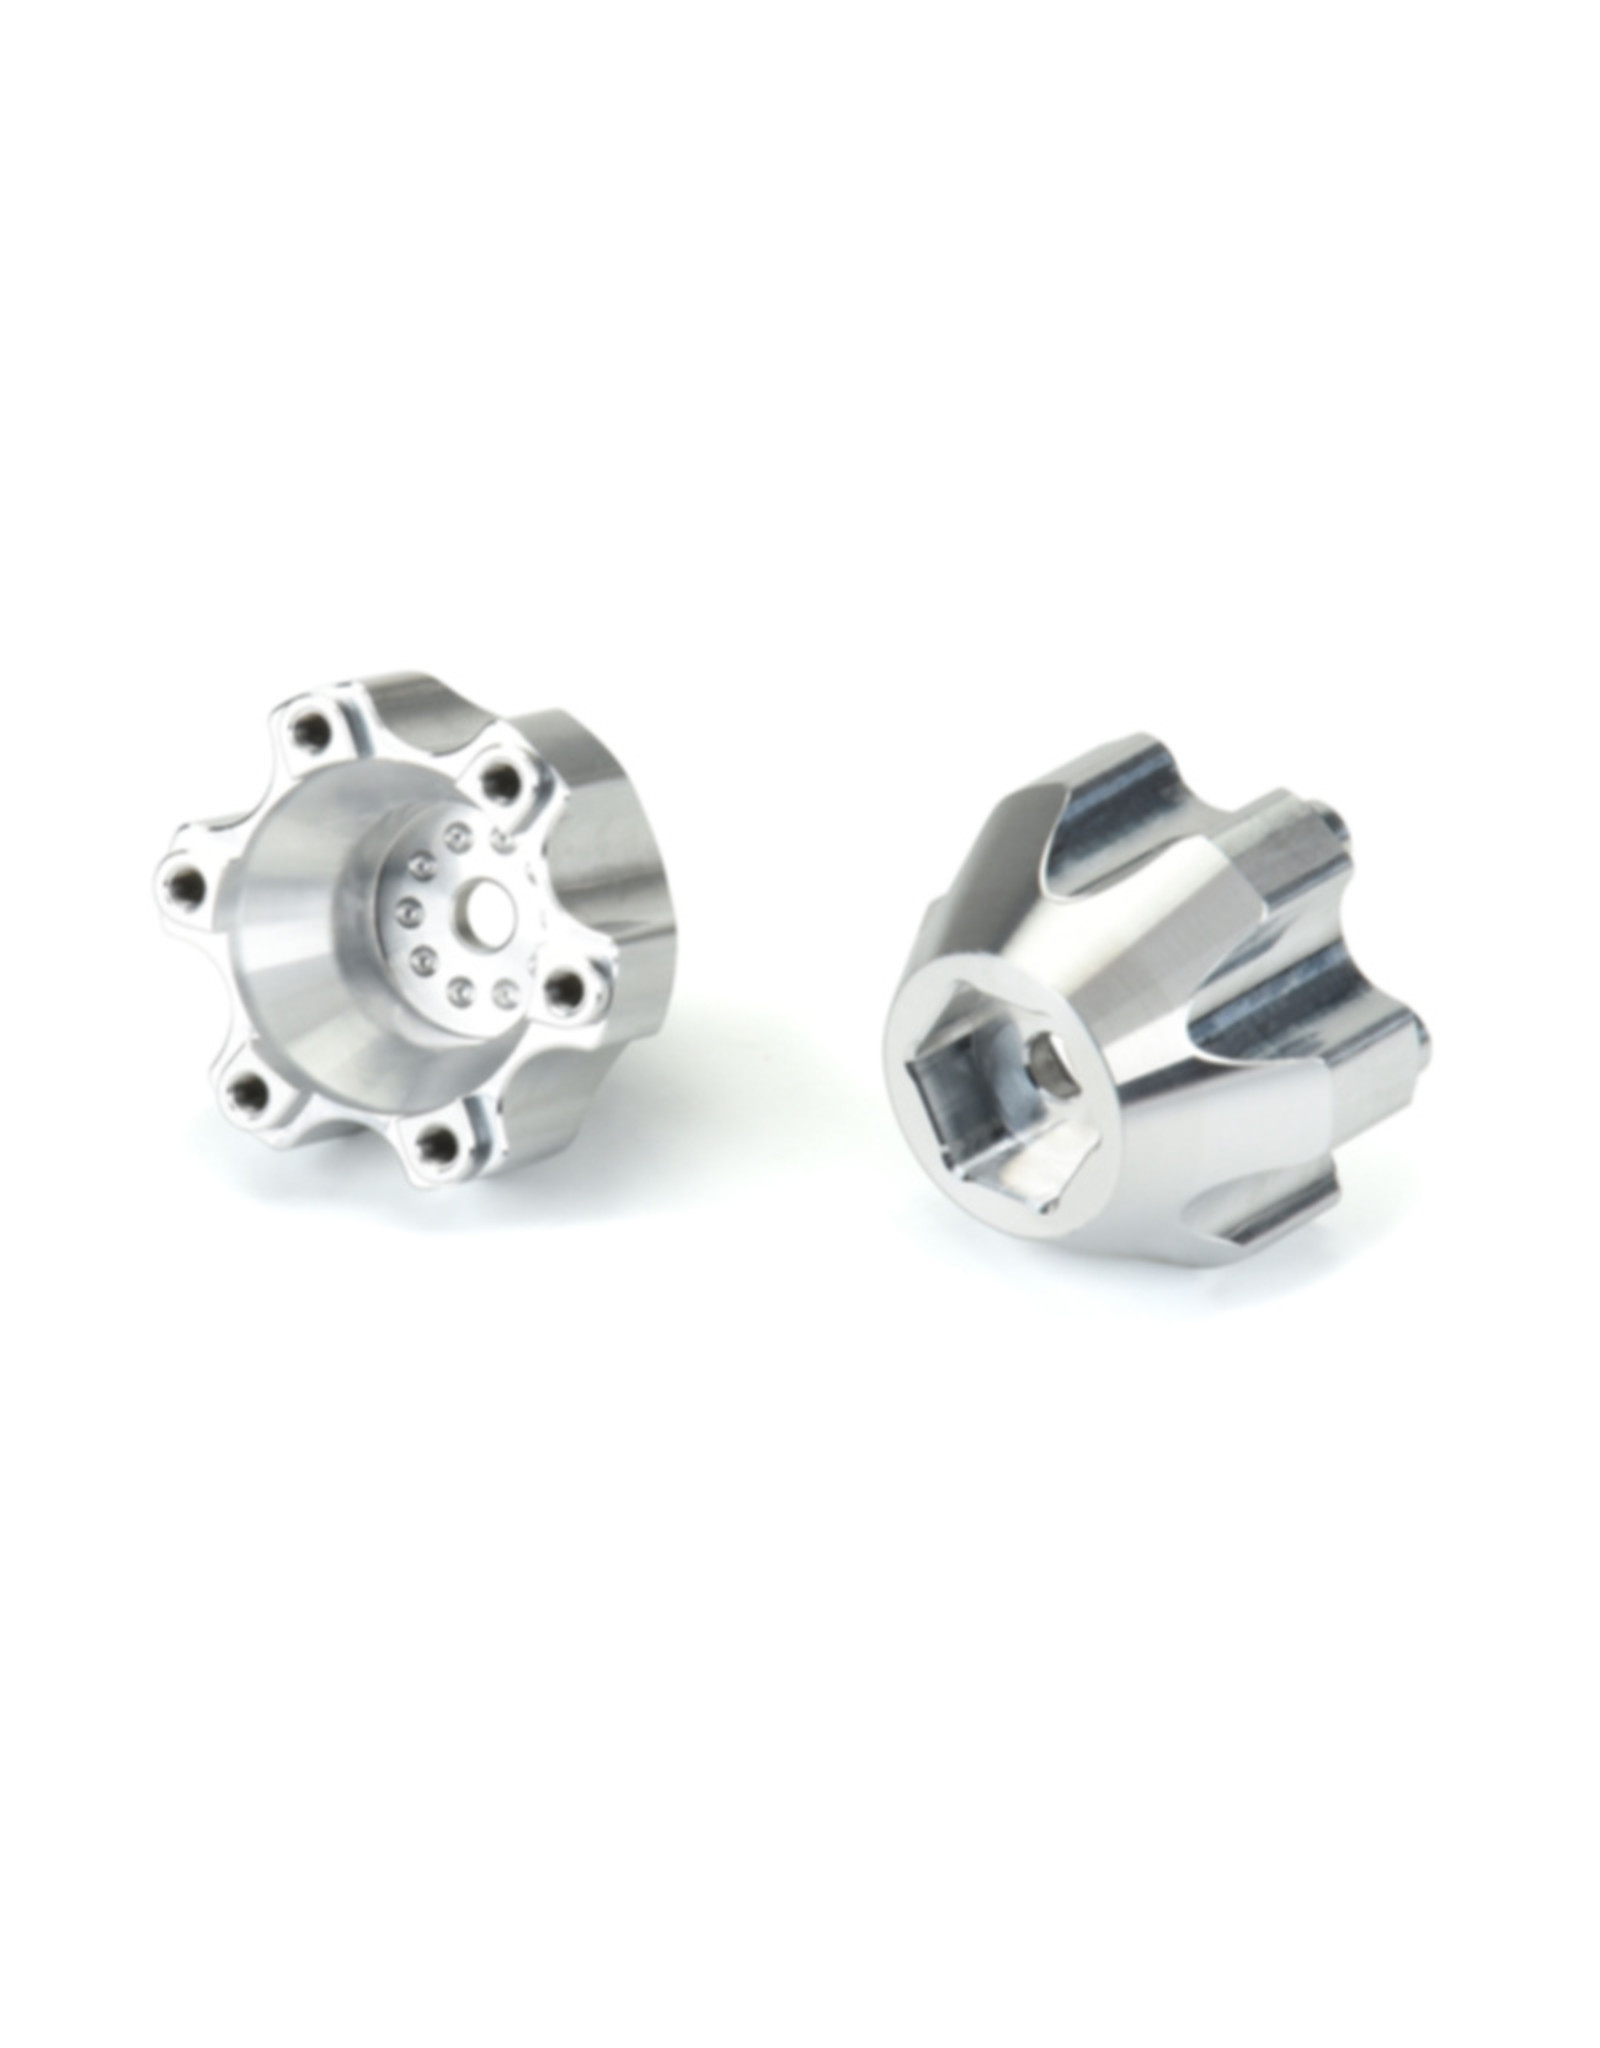 Pro-Line Racing PRO634600   6 x30 to 14mm Aluminum Hex Adapters